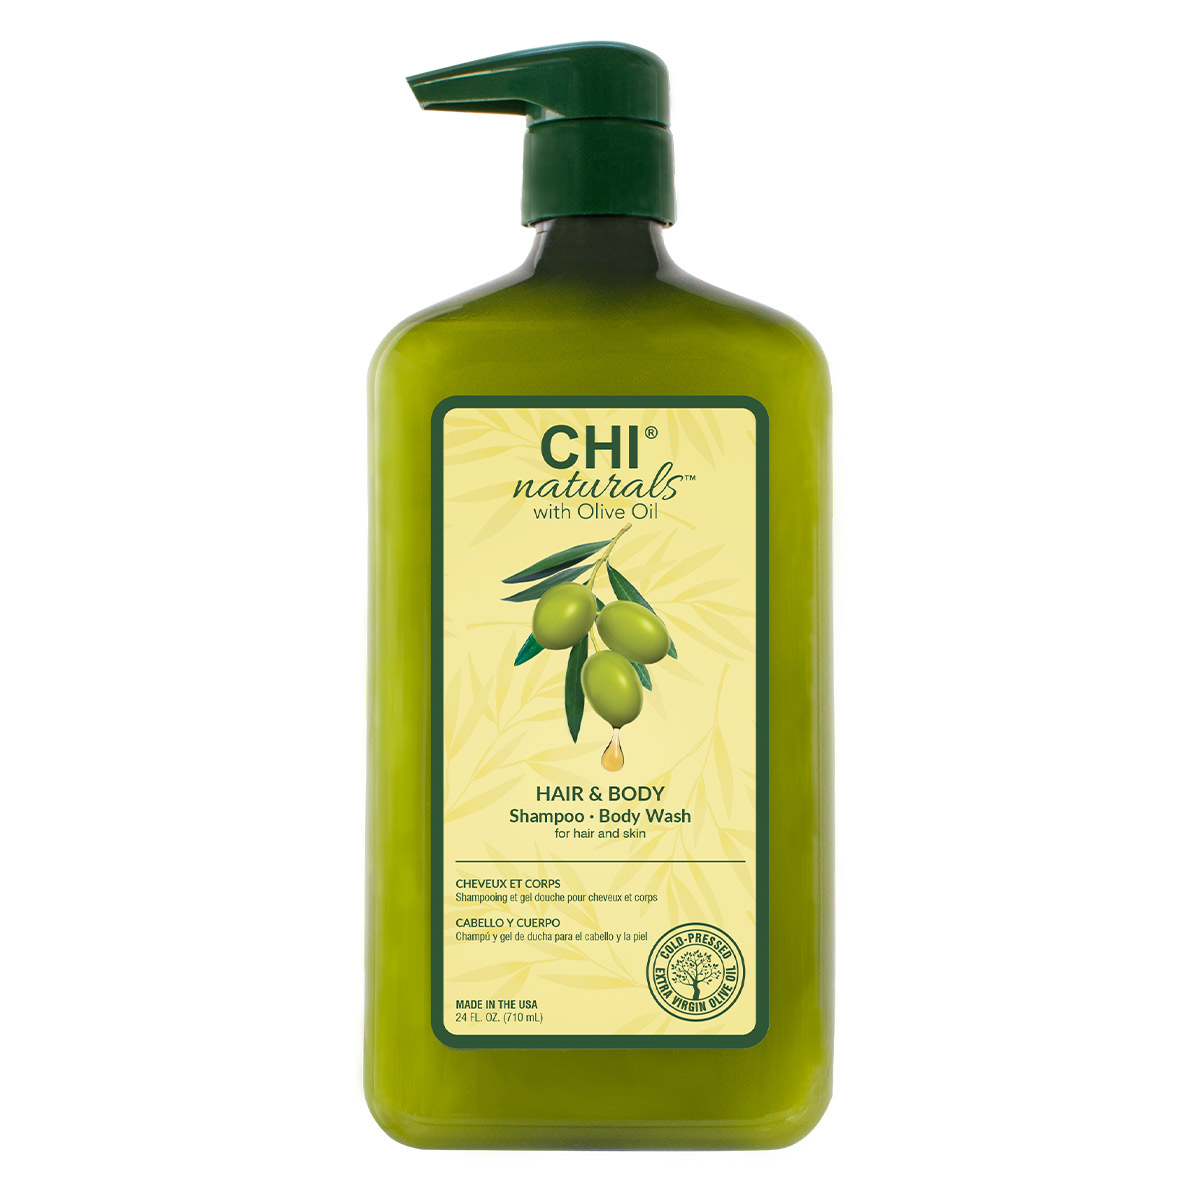 CHI Naturals with Olive Oil Hair And Body - Shampoo & Body wash - 340 ml - Olive Bio Brillance et Anti-fourches